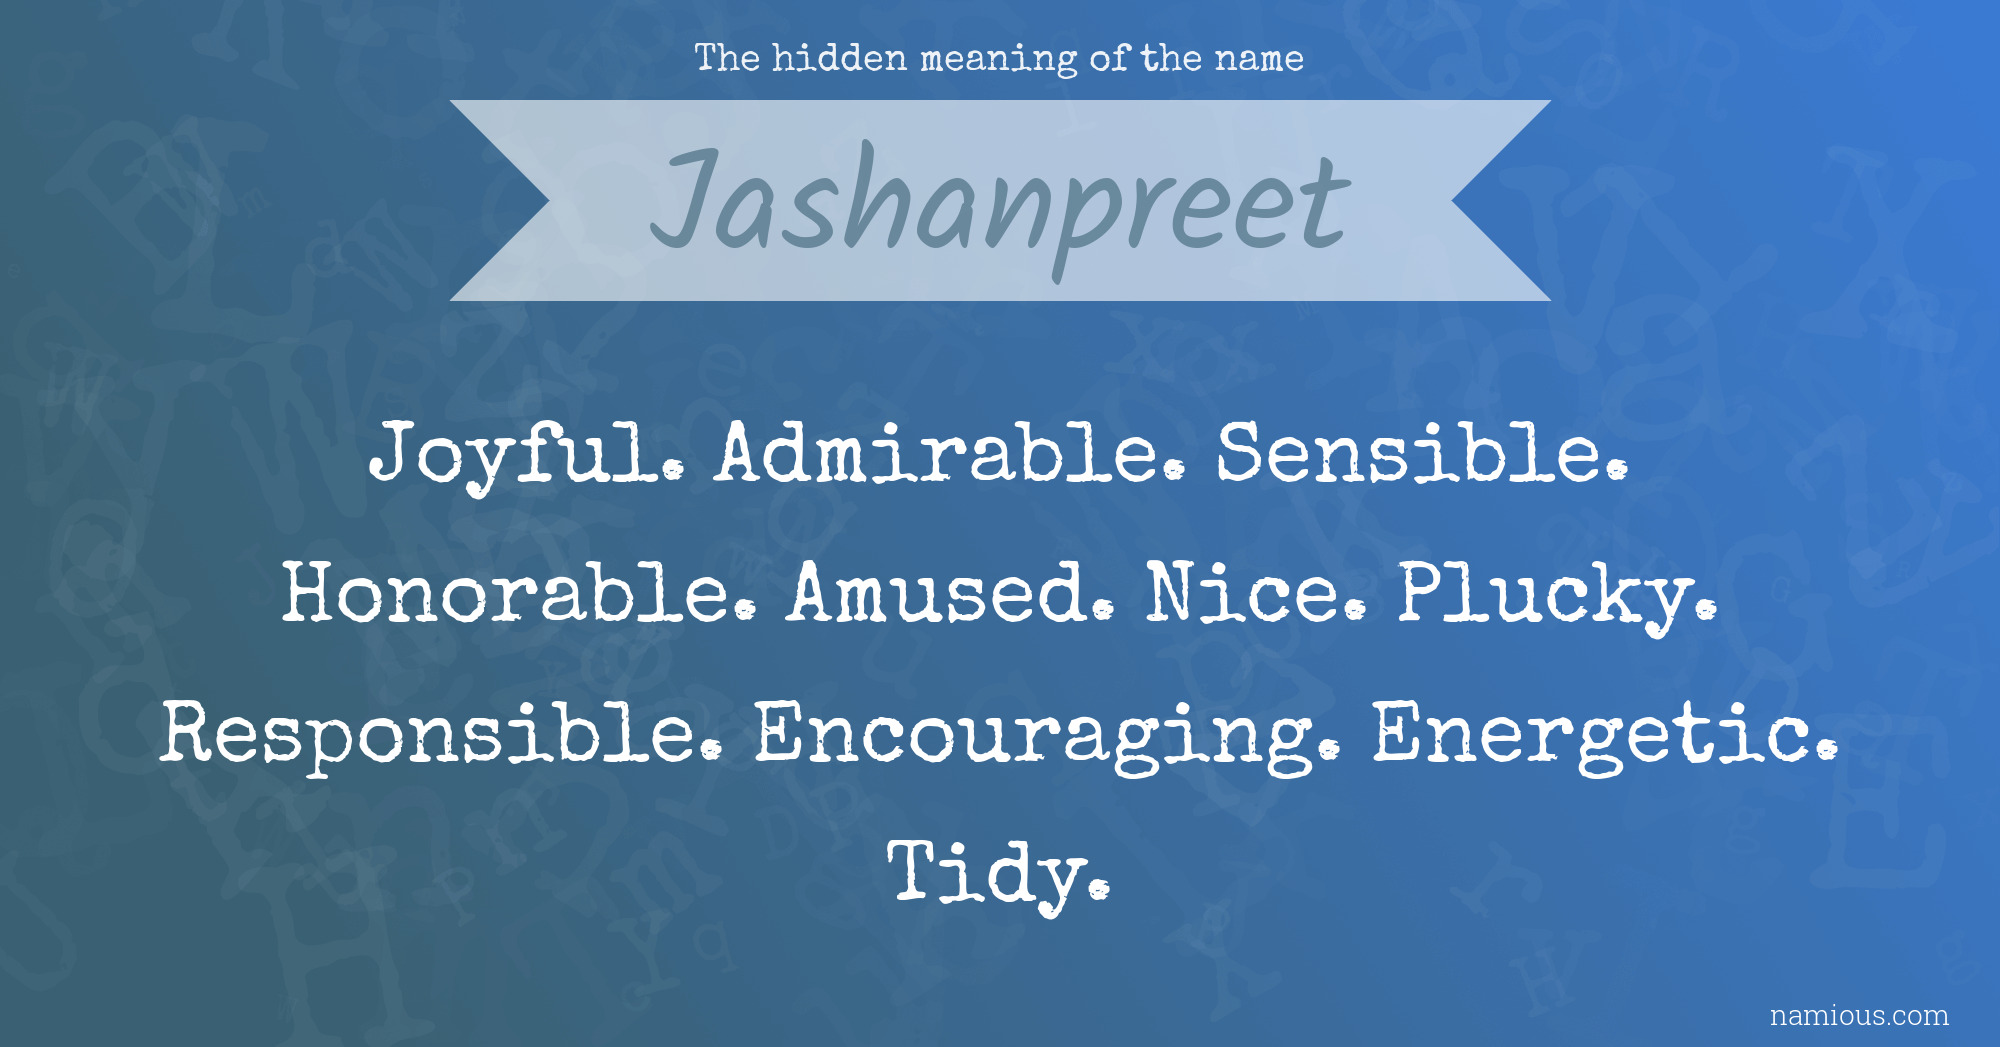 The hidden meaning of the name Jashanpreet